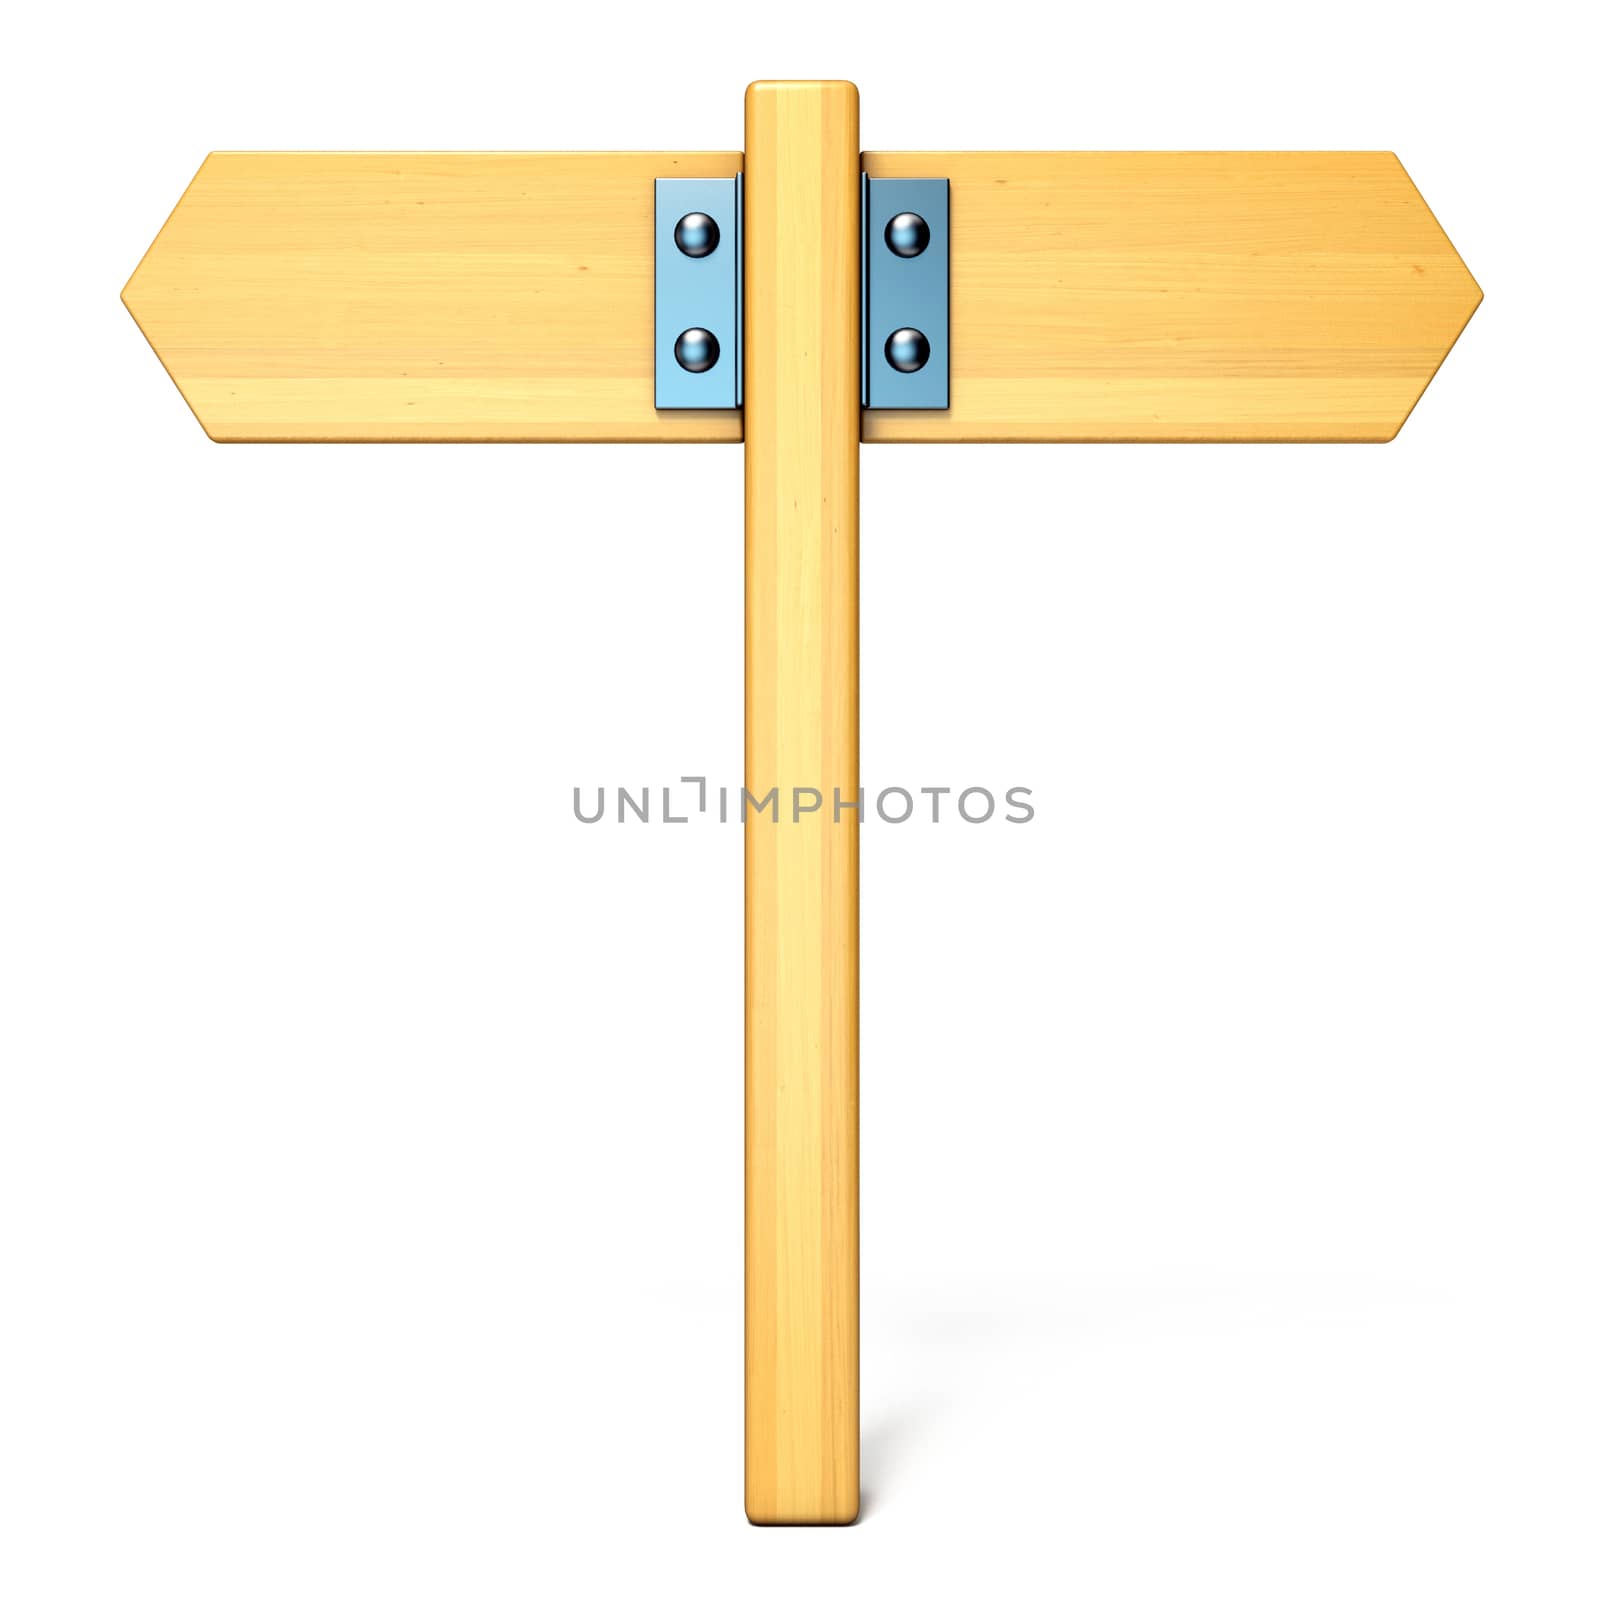 Wooden sign two ways 3D render illustration isolated on white background